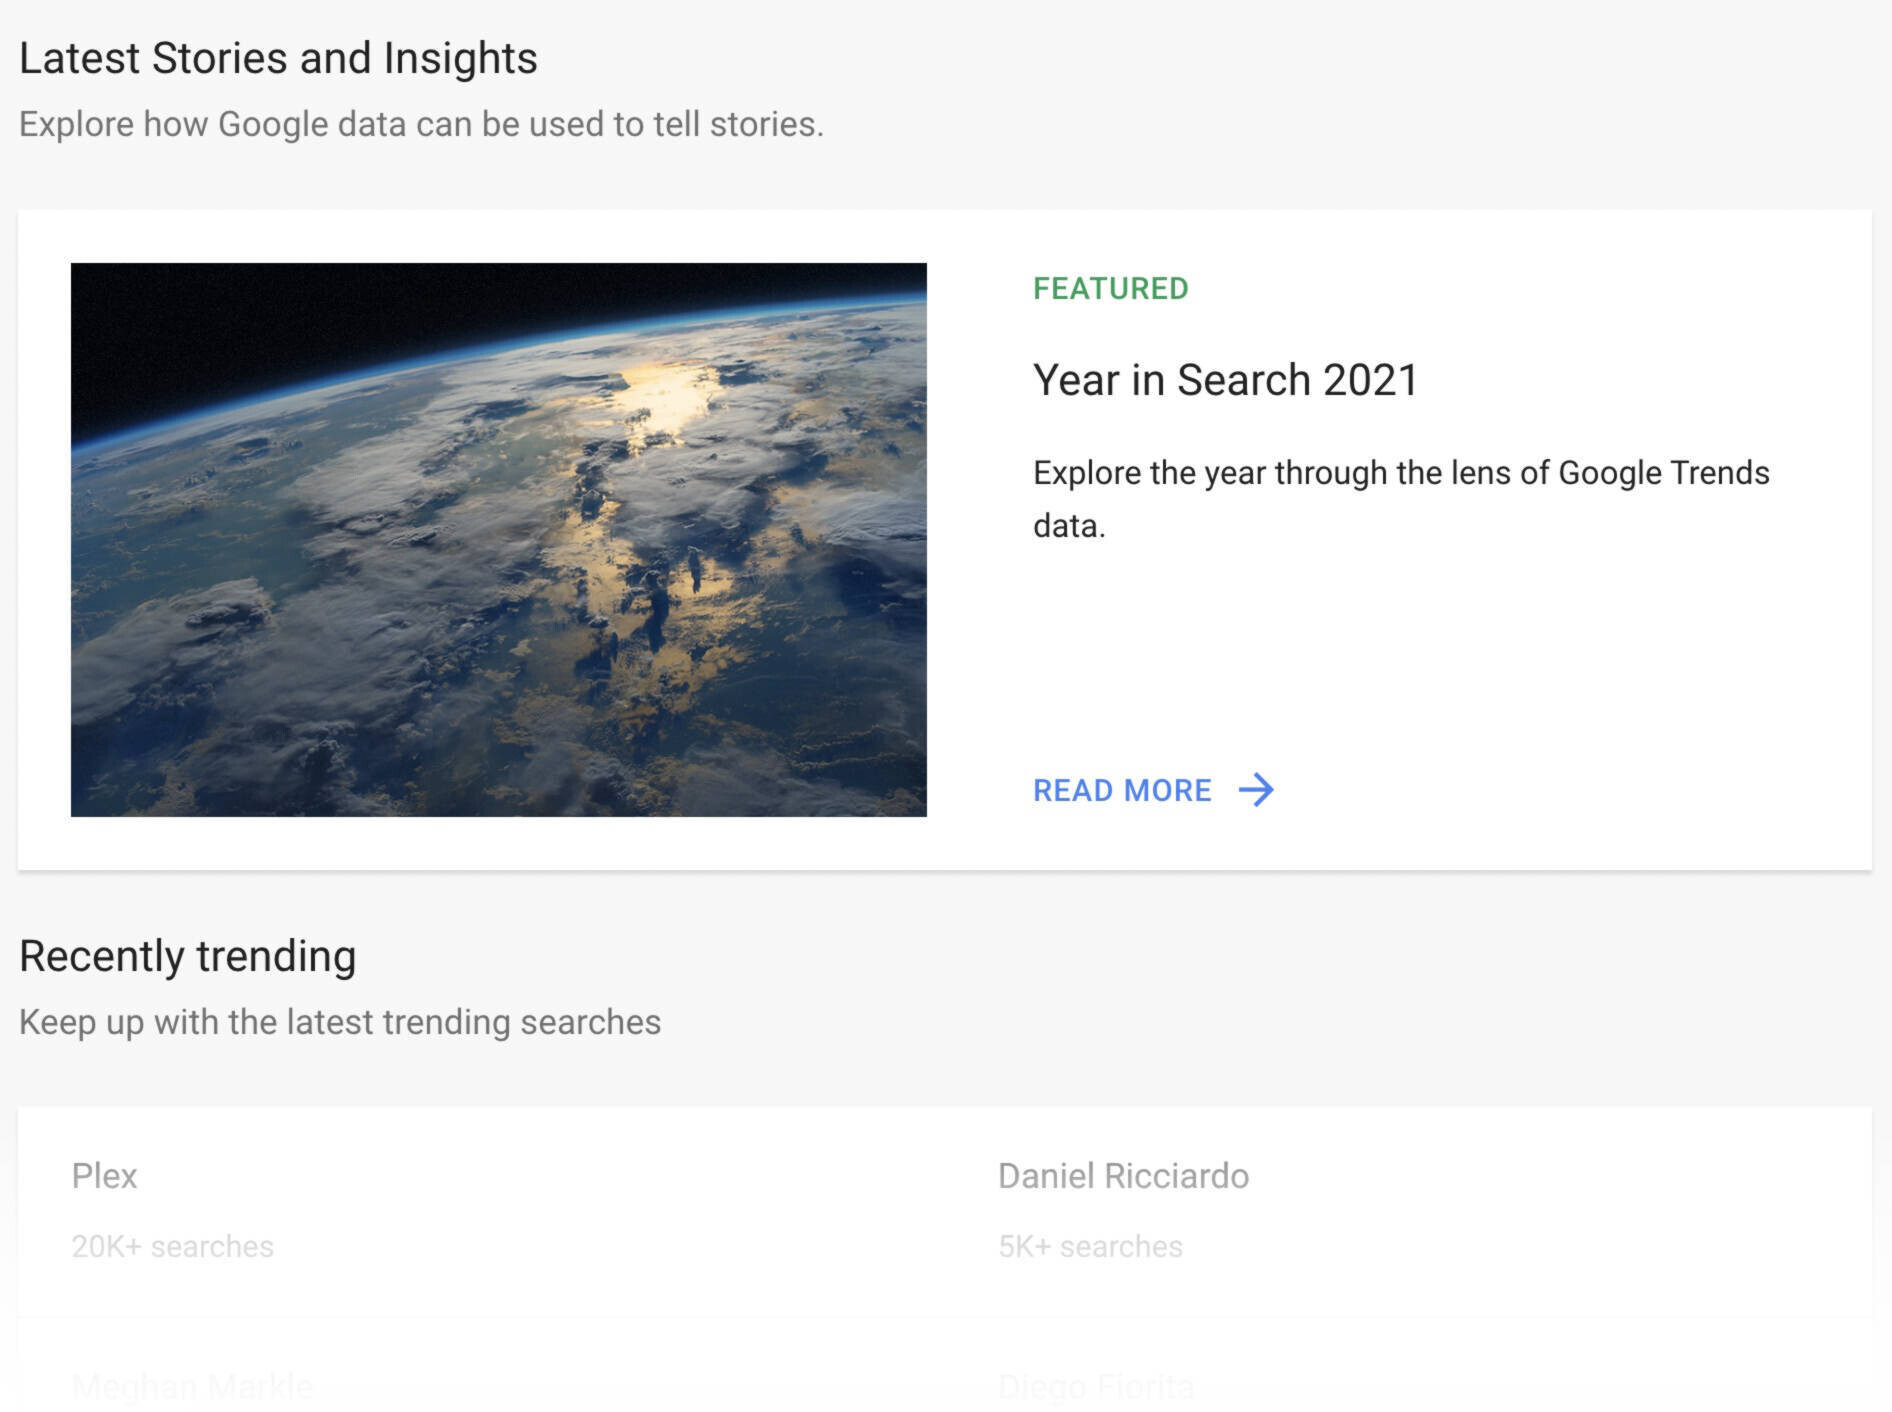 Latest stories and insights in Google Trends